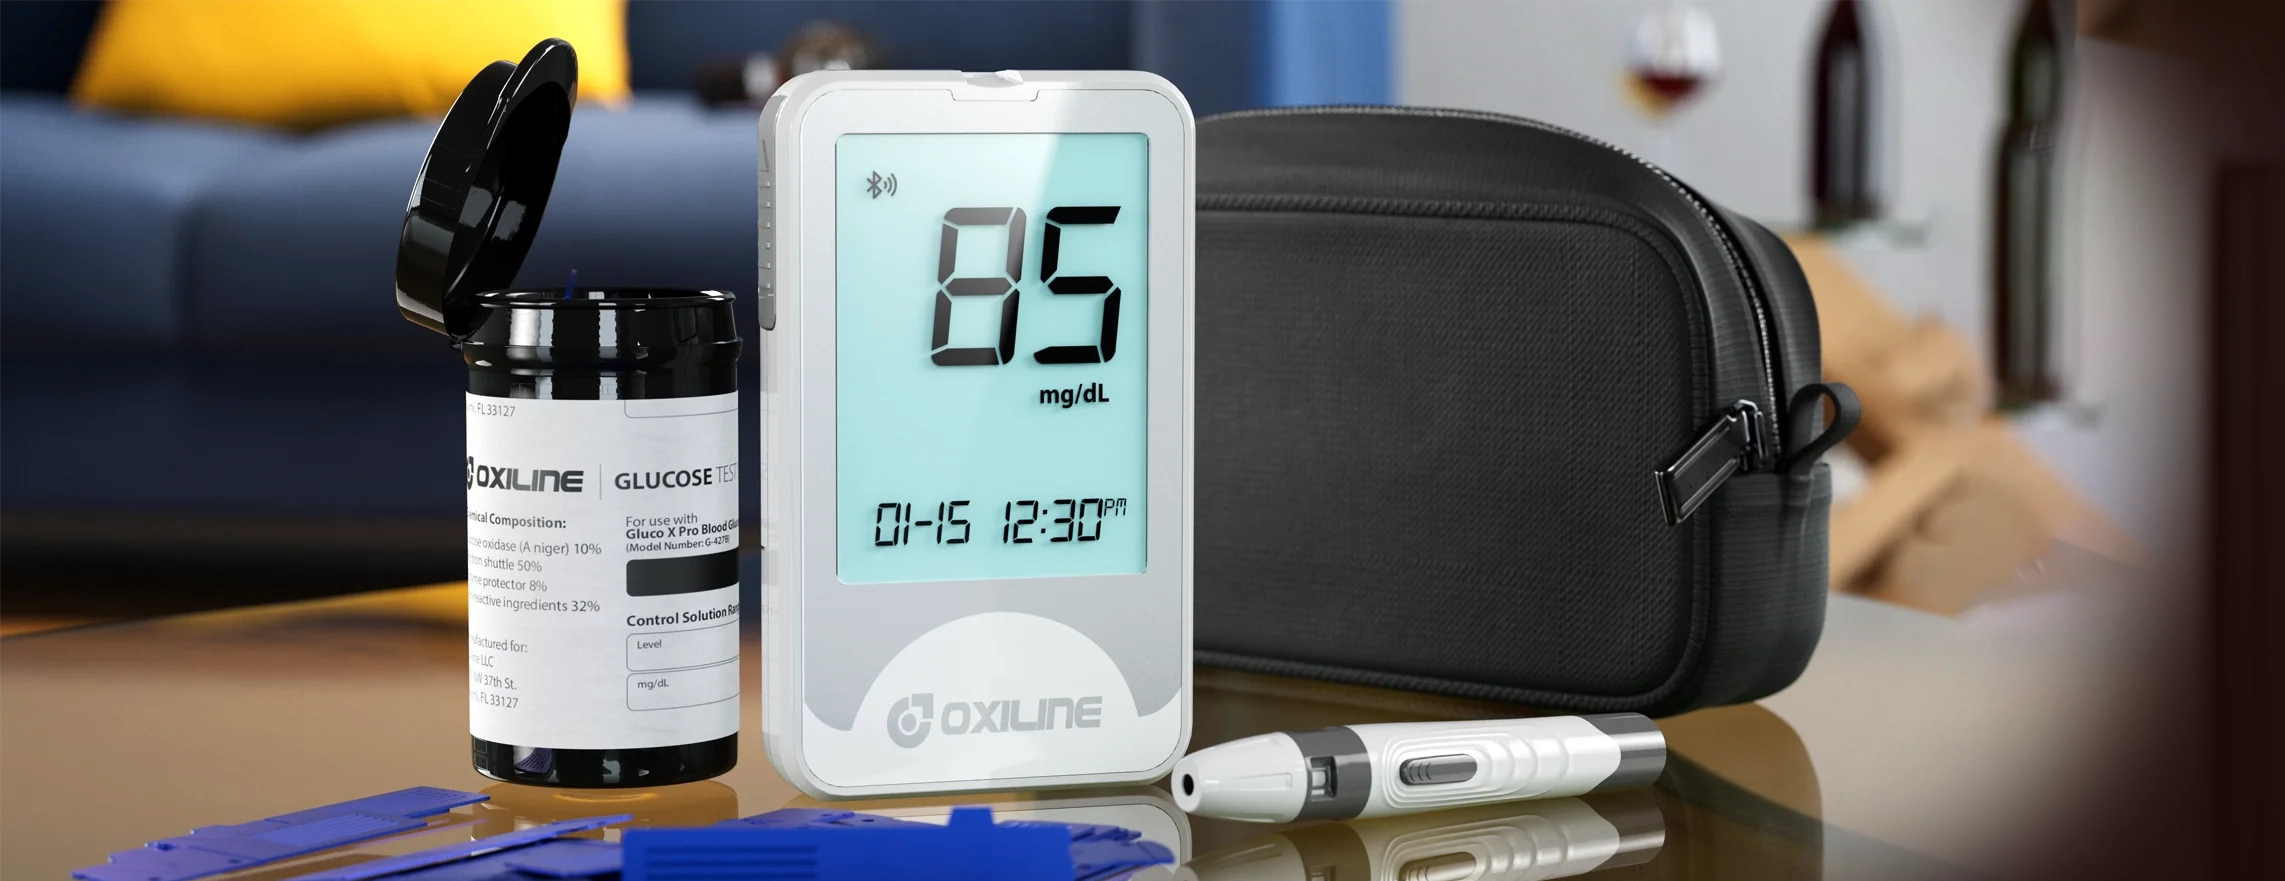 A glucometer kit on a table, showing the device and accessories used for measuring blood sugar levels.